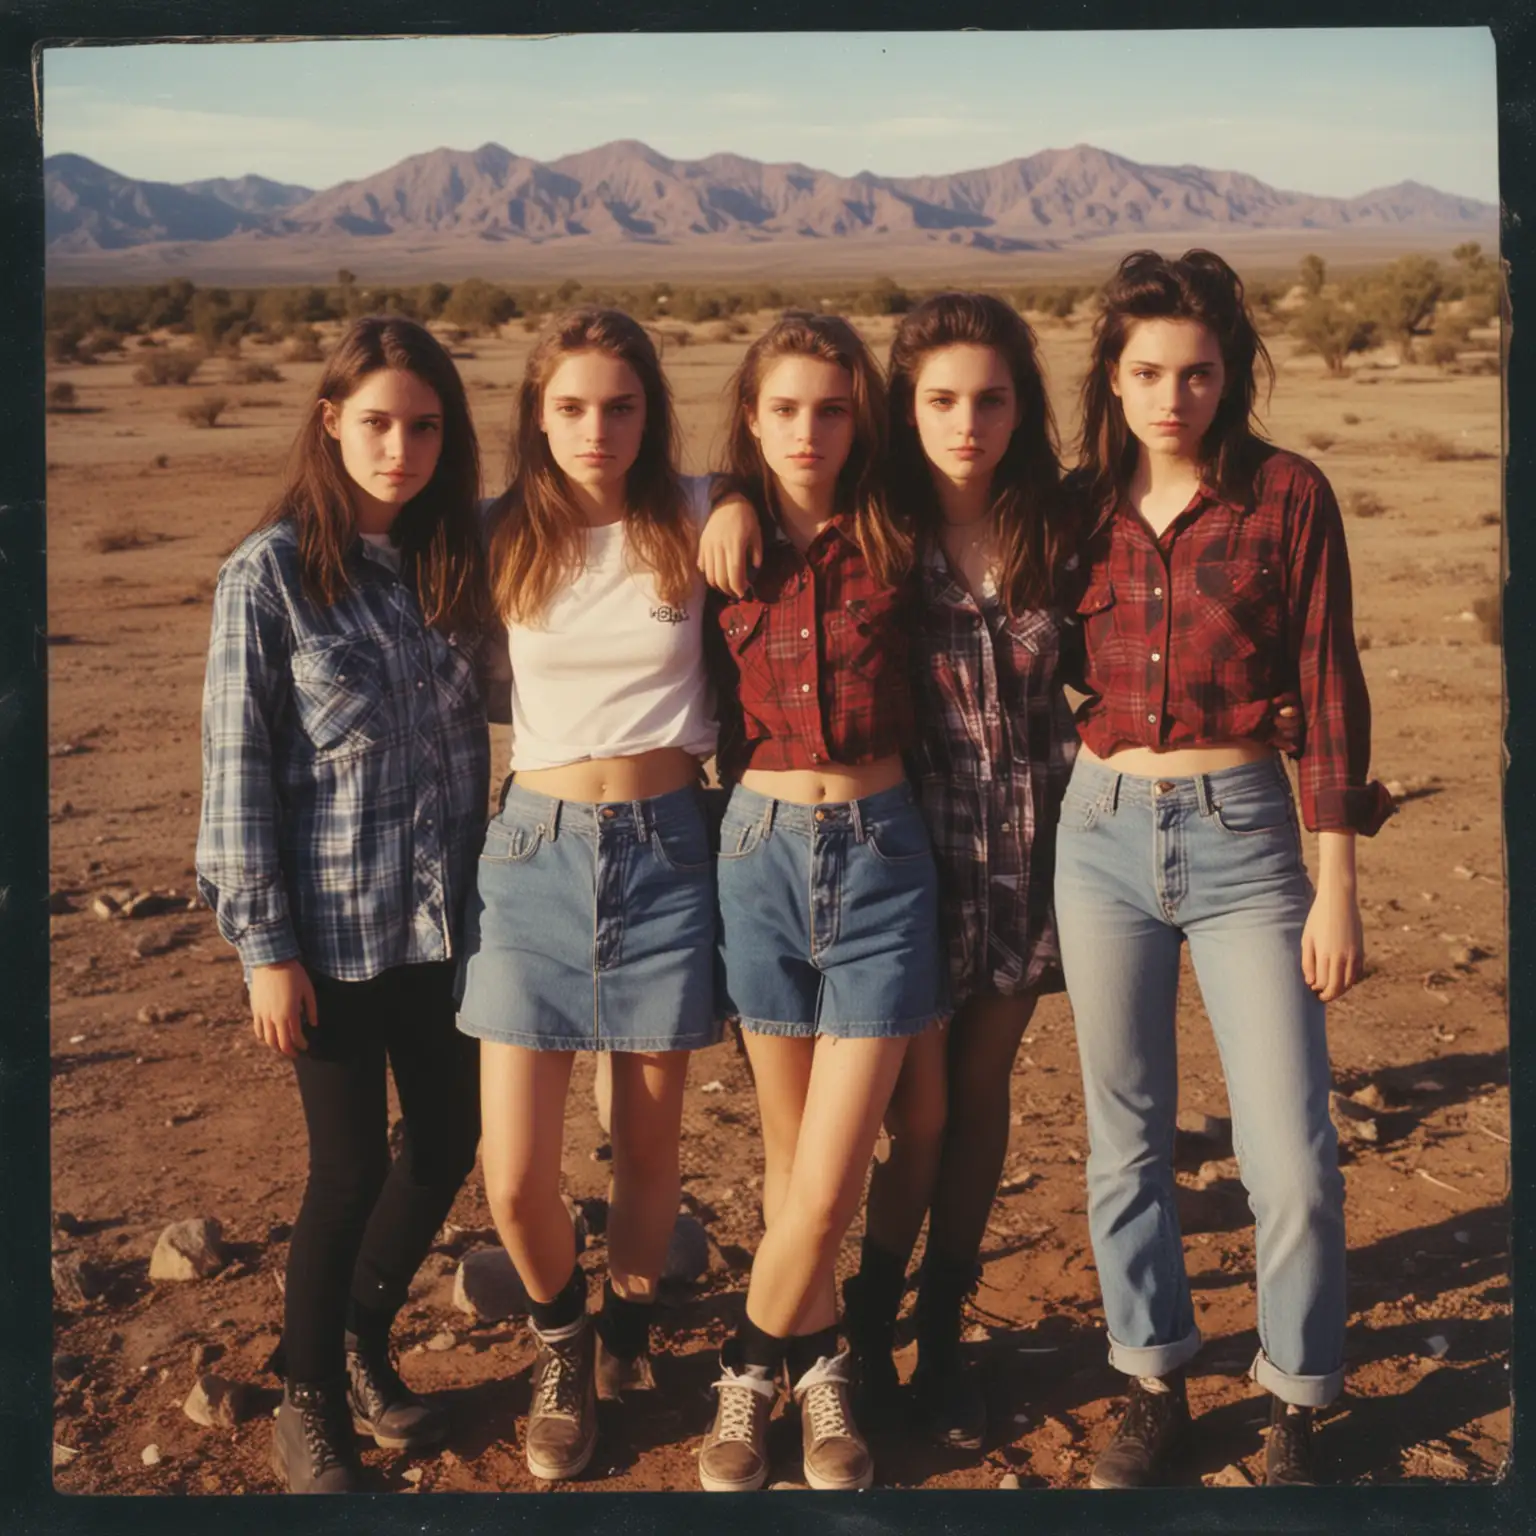 Teenage Girls in Grunge Style Pose for Polaroid Picture in Desert